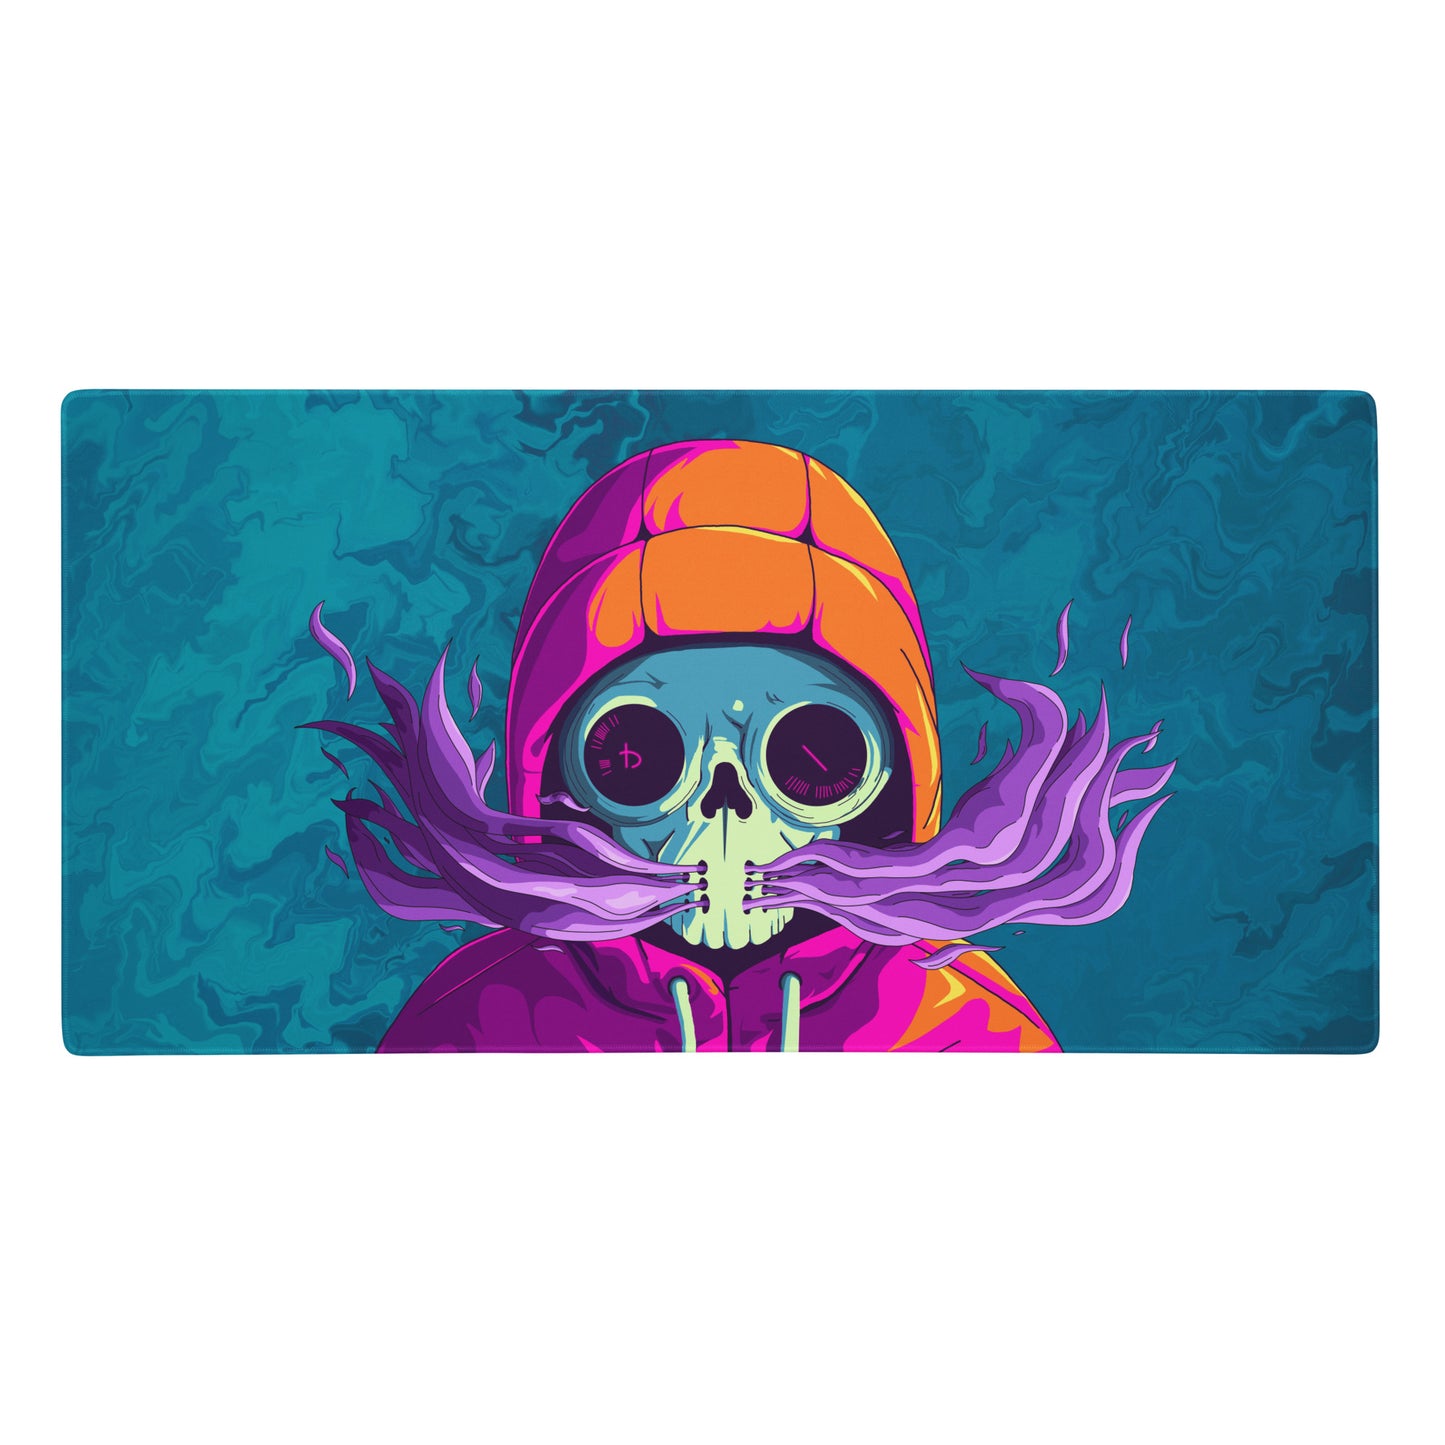 A 36" x 18" desk pad with a man wearing a skull gas mask breathing smoke out from it. Blue in color.